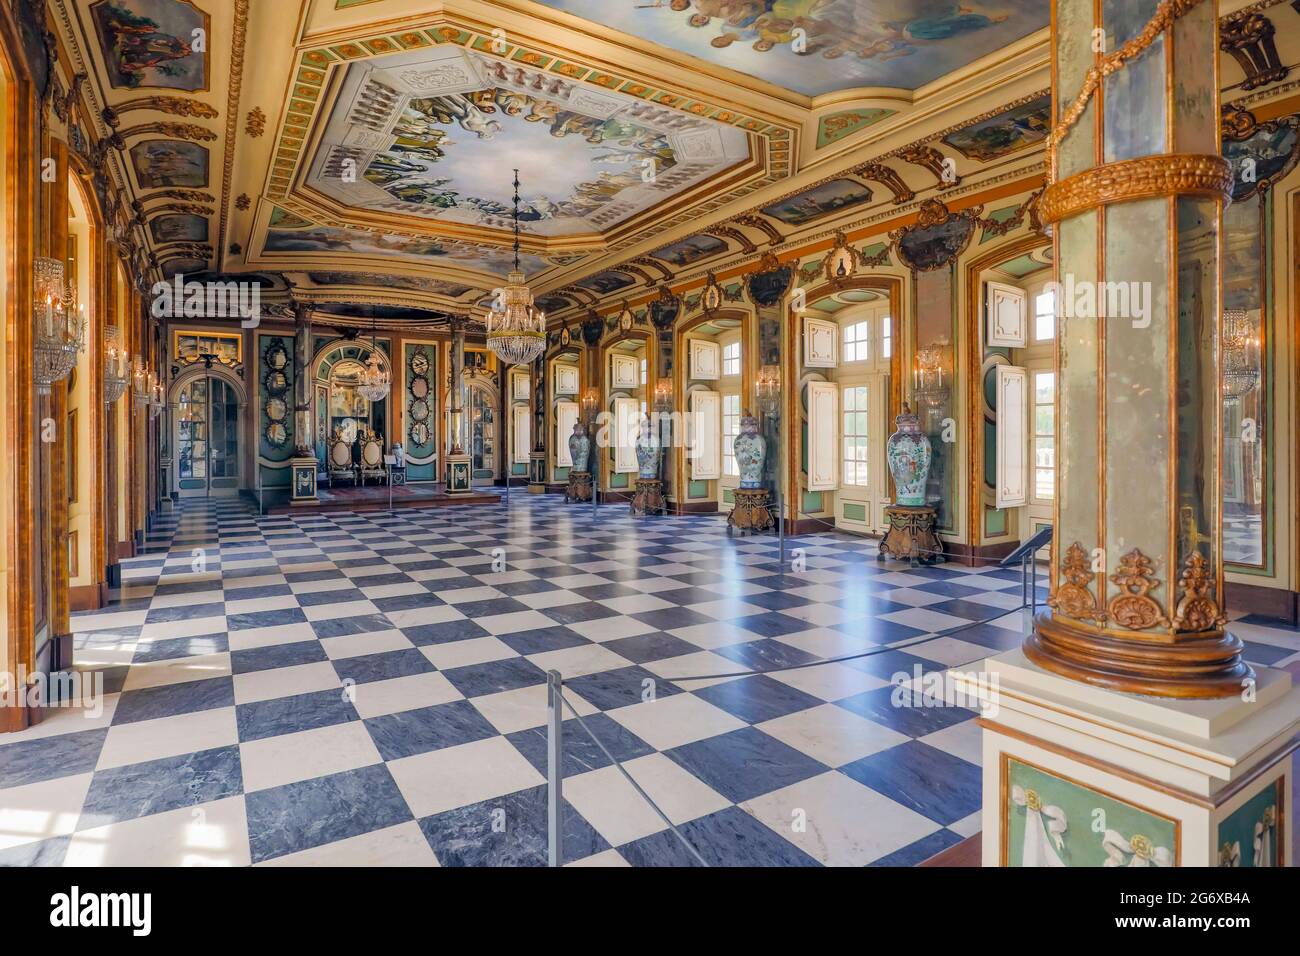 Queluz Palace, Sintra Municipality, Portugal.   Sala dos Embaixadores, or Hall of the Ambassadors.  Construction of the Rococo palace began in 1747 un Stock Photo